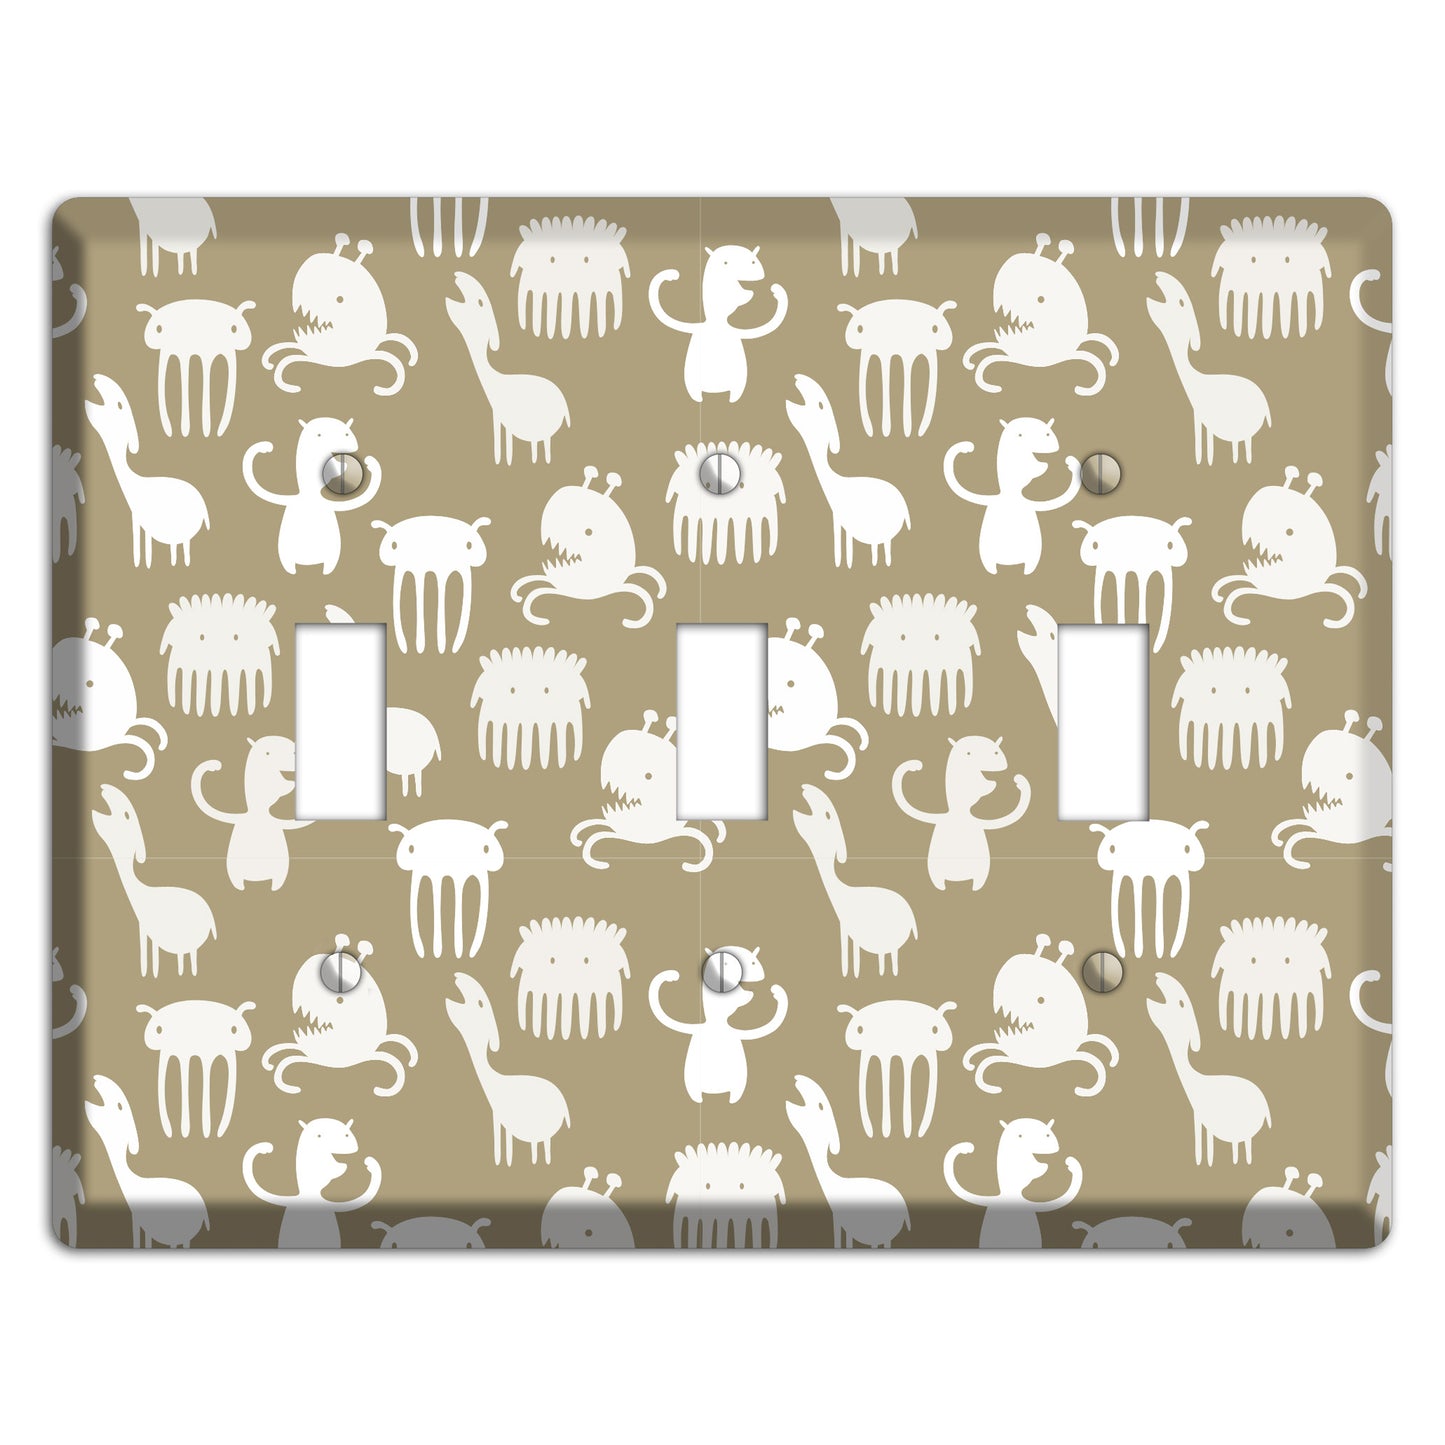 Sily Monsters Brown and White 3 Toggle Wallplate